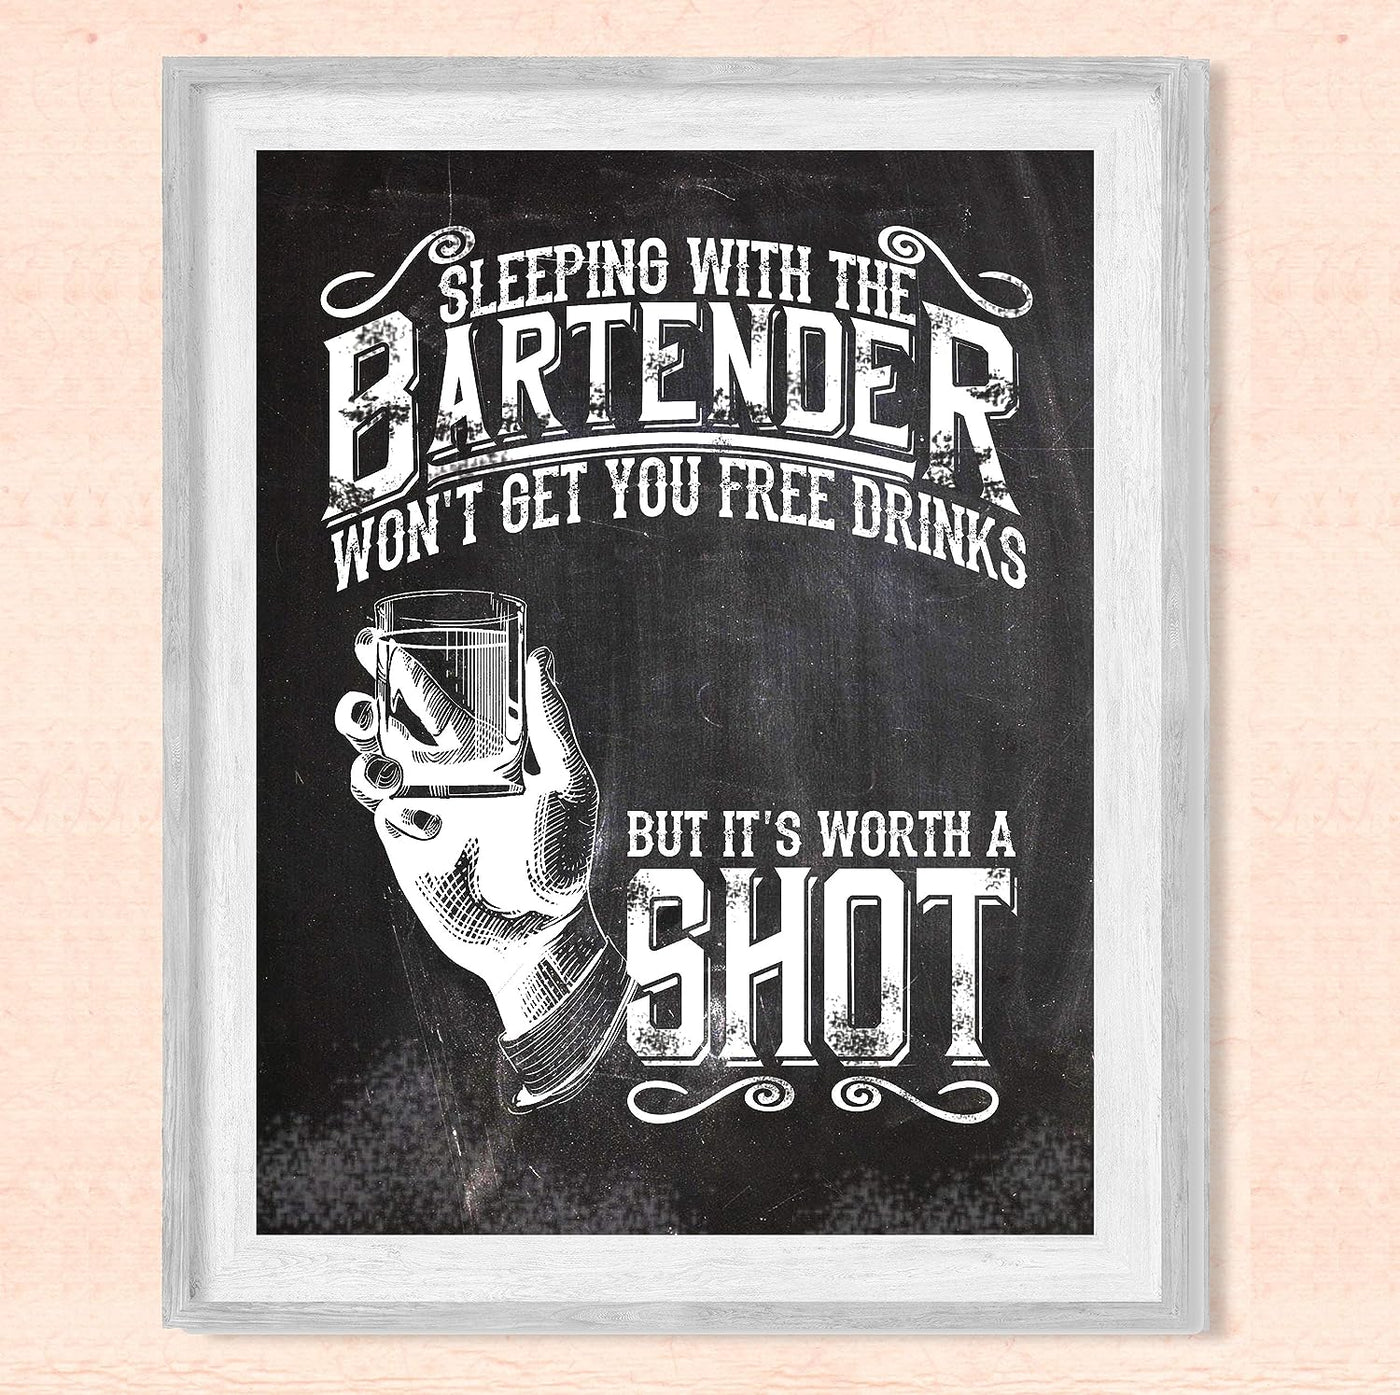 Sleeping With Bartender Won't Get You Free Drinks Funny Bar Sign-8 x 10" Rustic Beer & Alcohol Wall Art Print-Ready to Frame. Humorous Home-Cave-Garage-Shop Decor. Fun Gift! Printed On Photo Paper.